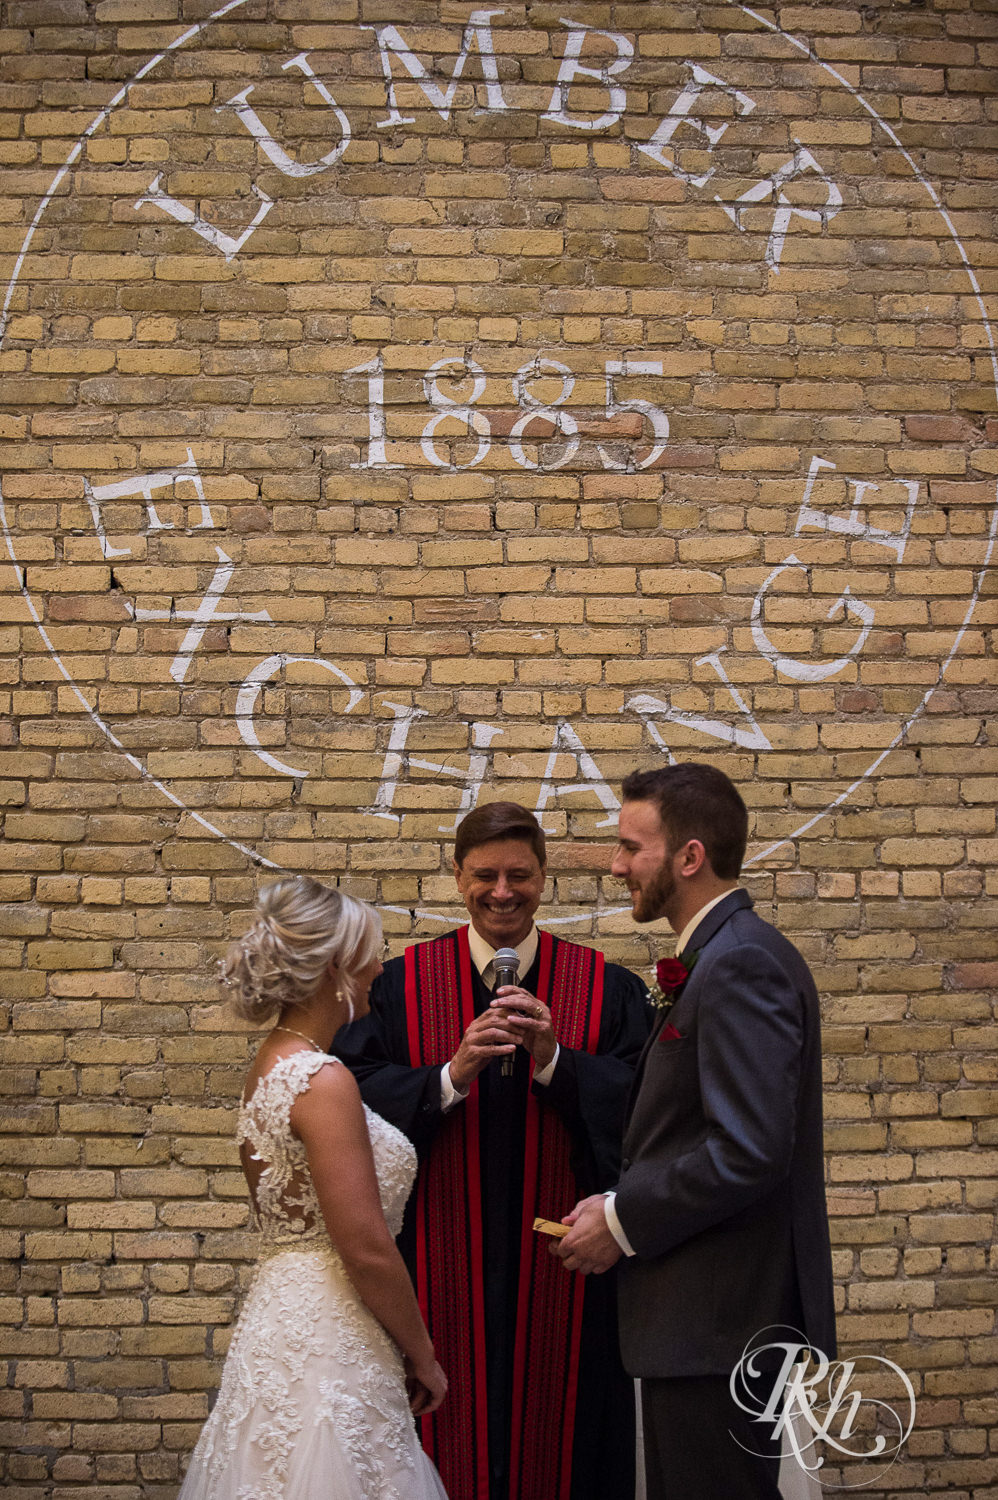 Bride and groom smile during wedding ceremony at the Lumber Exchange Event Center in Minneapolis, Minnesota.